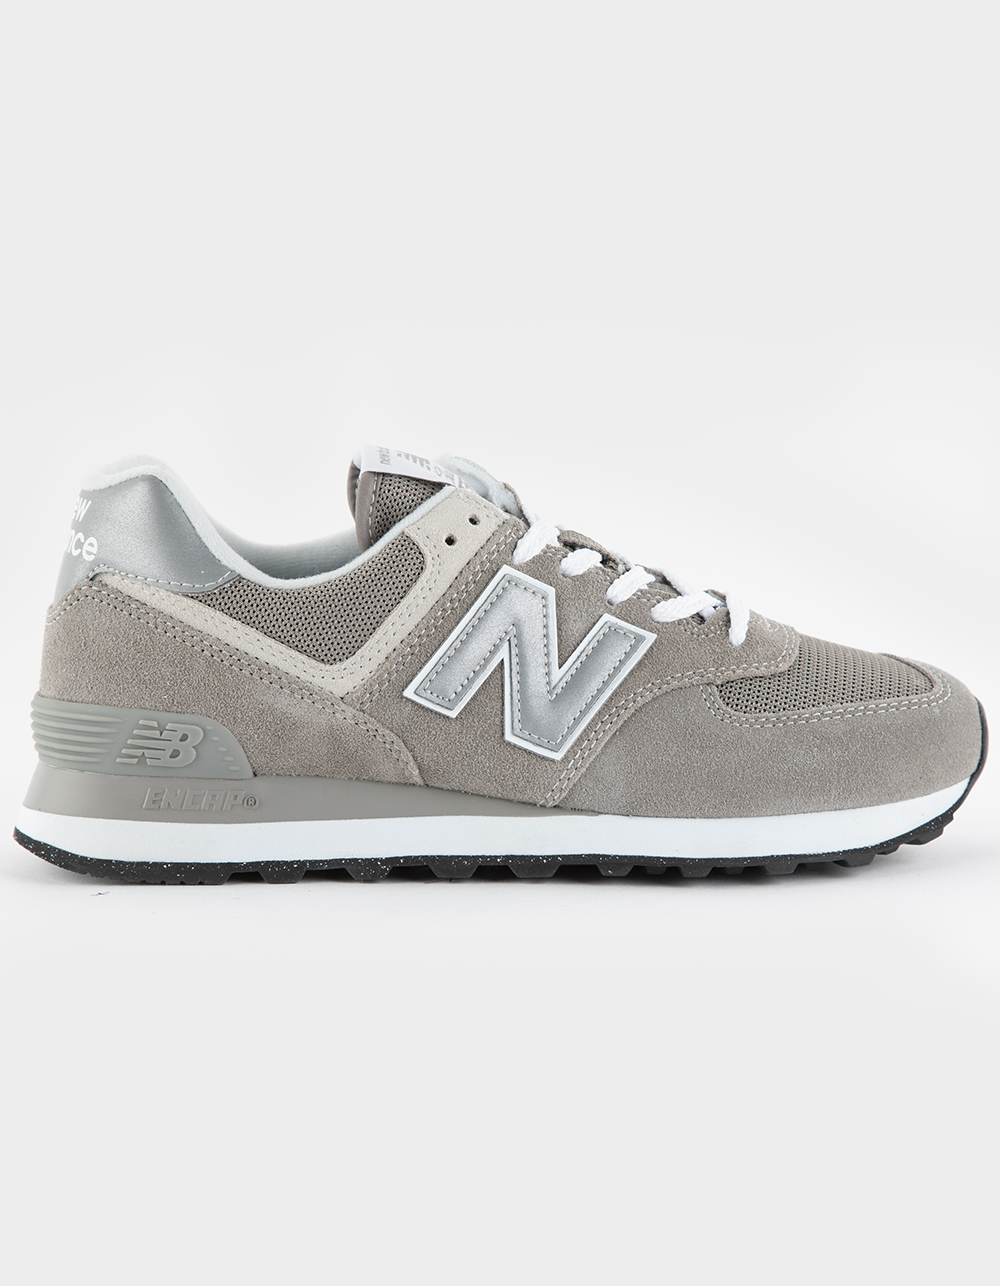 NEW BALANCE 574 Womens Shoes - GRAY/WHITE | Tillys